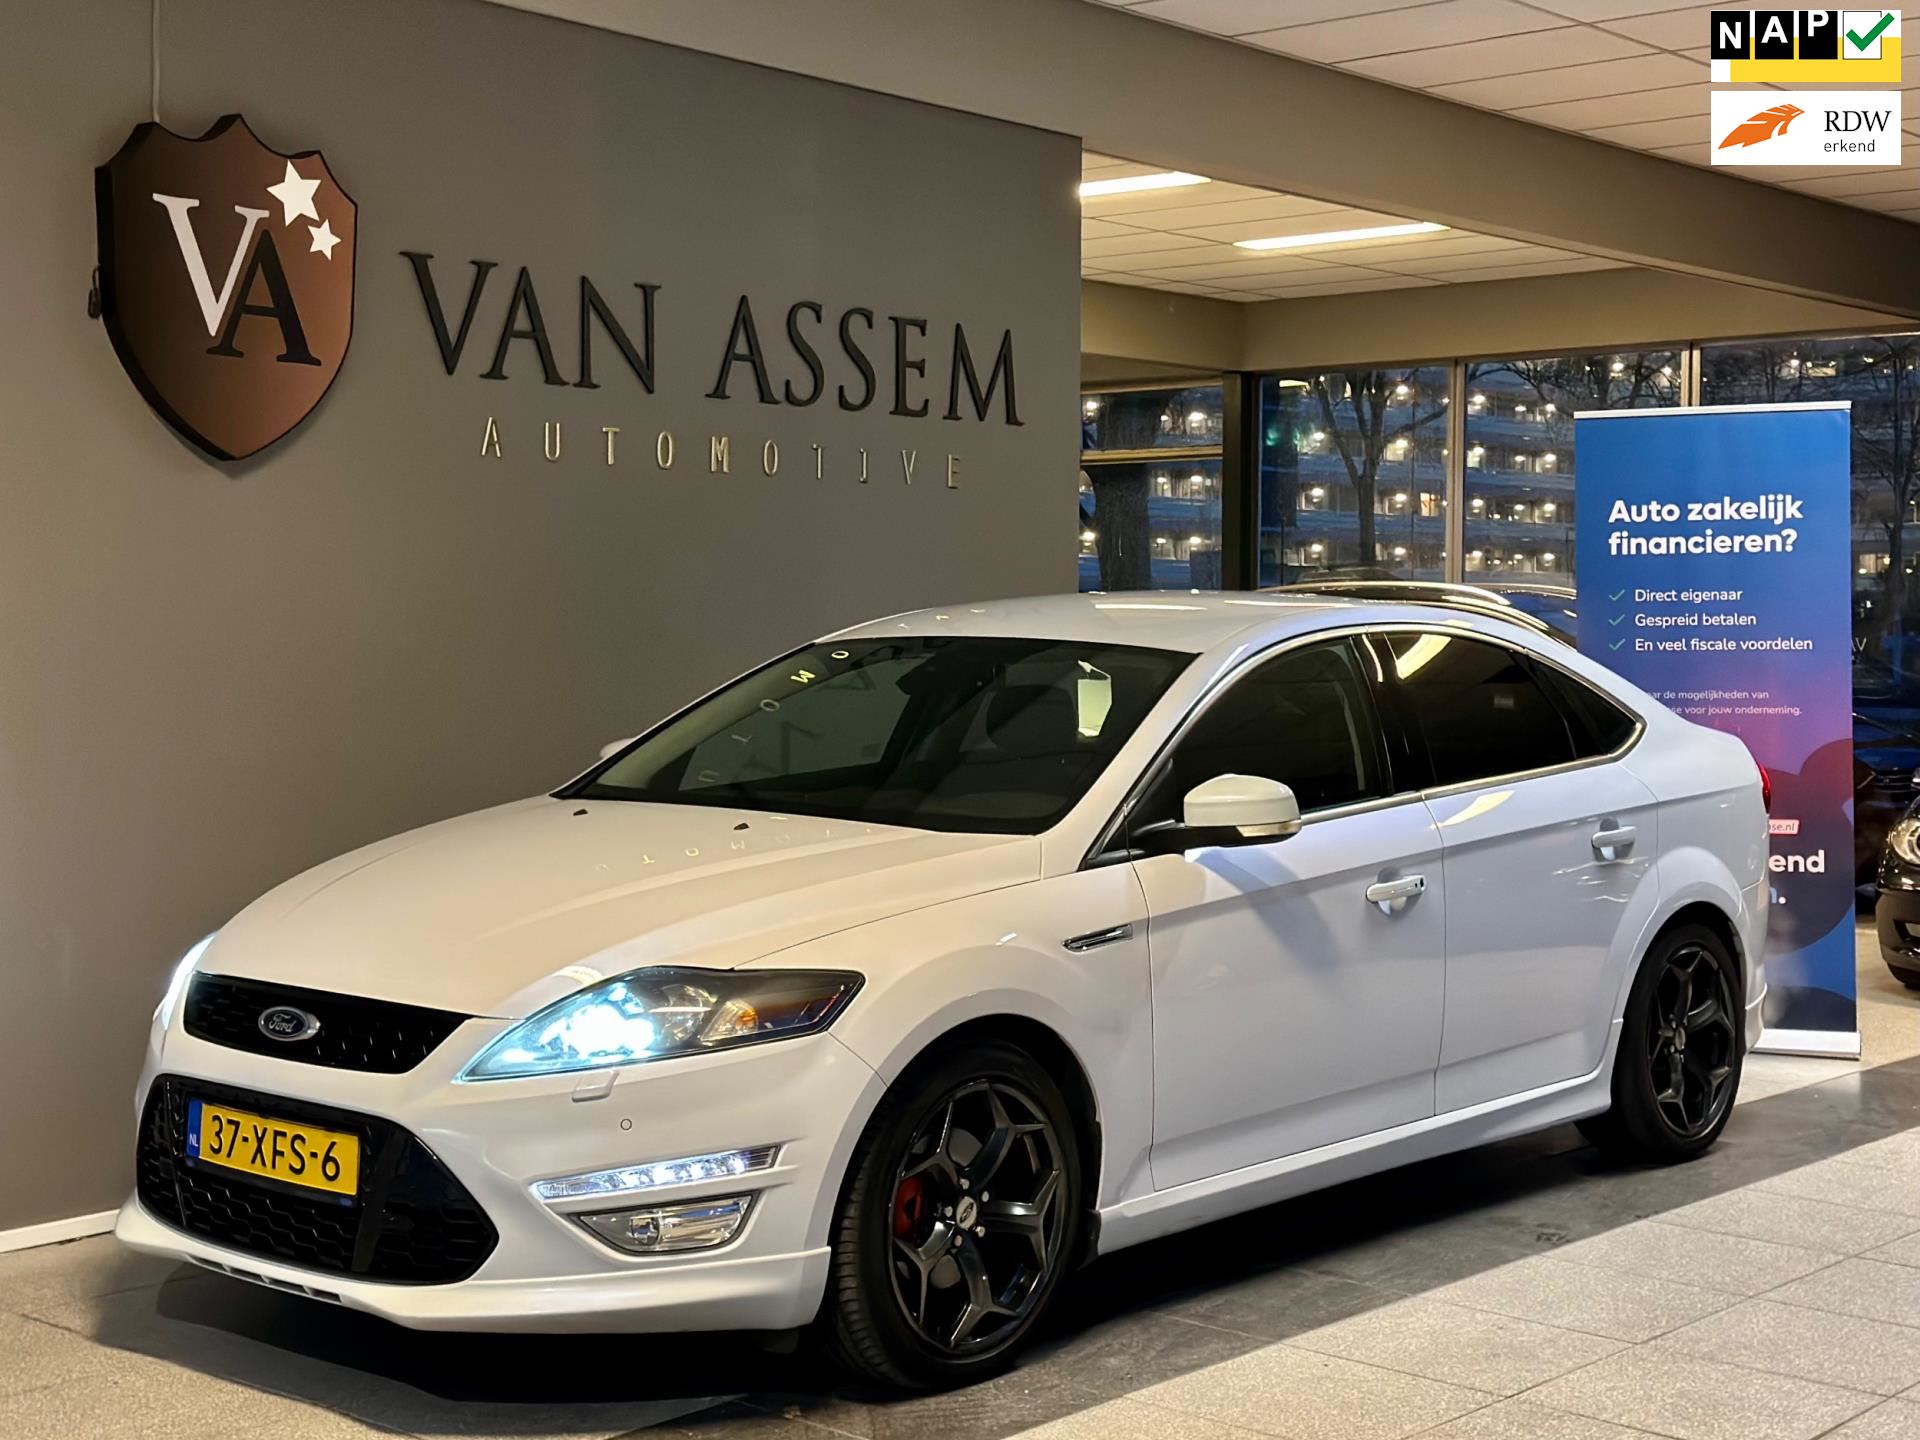 Ford Mondeo 2.0 S- Edition • 240 • Automaat • Xenon • Benzine uit 2012 - www.assemautomotive.nl